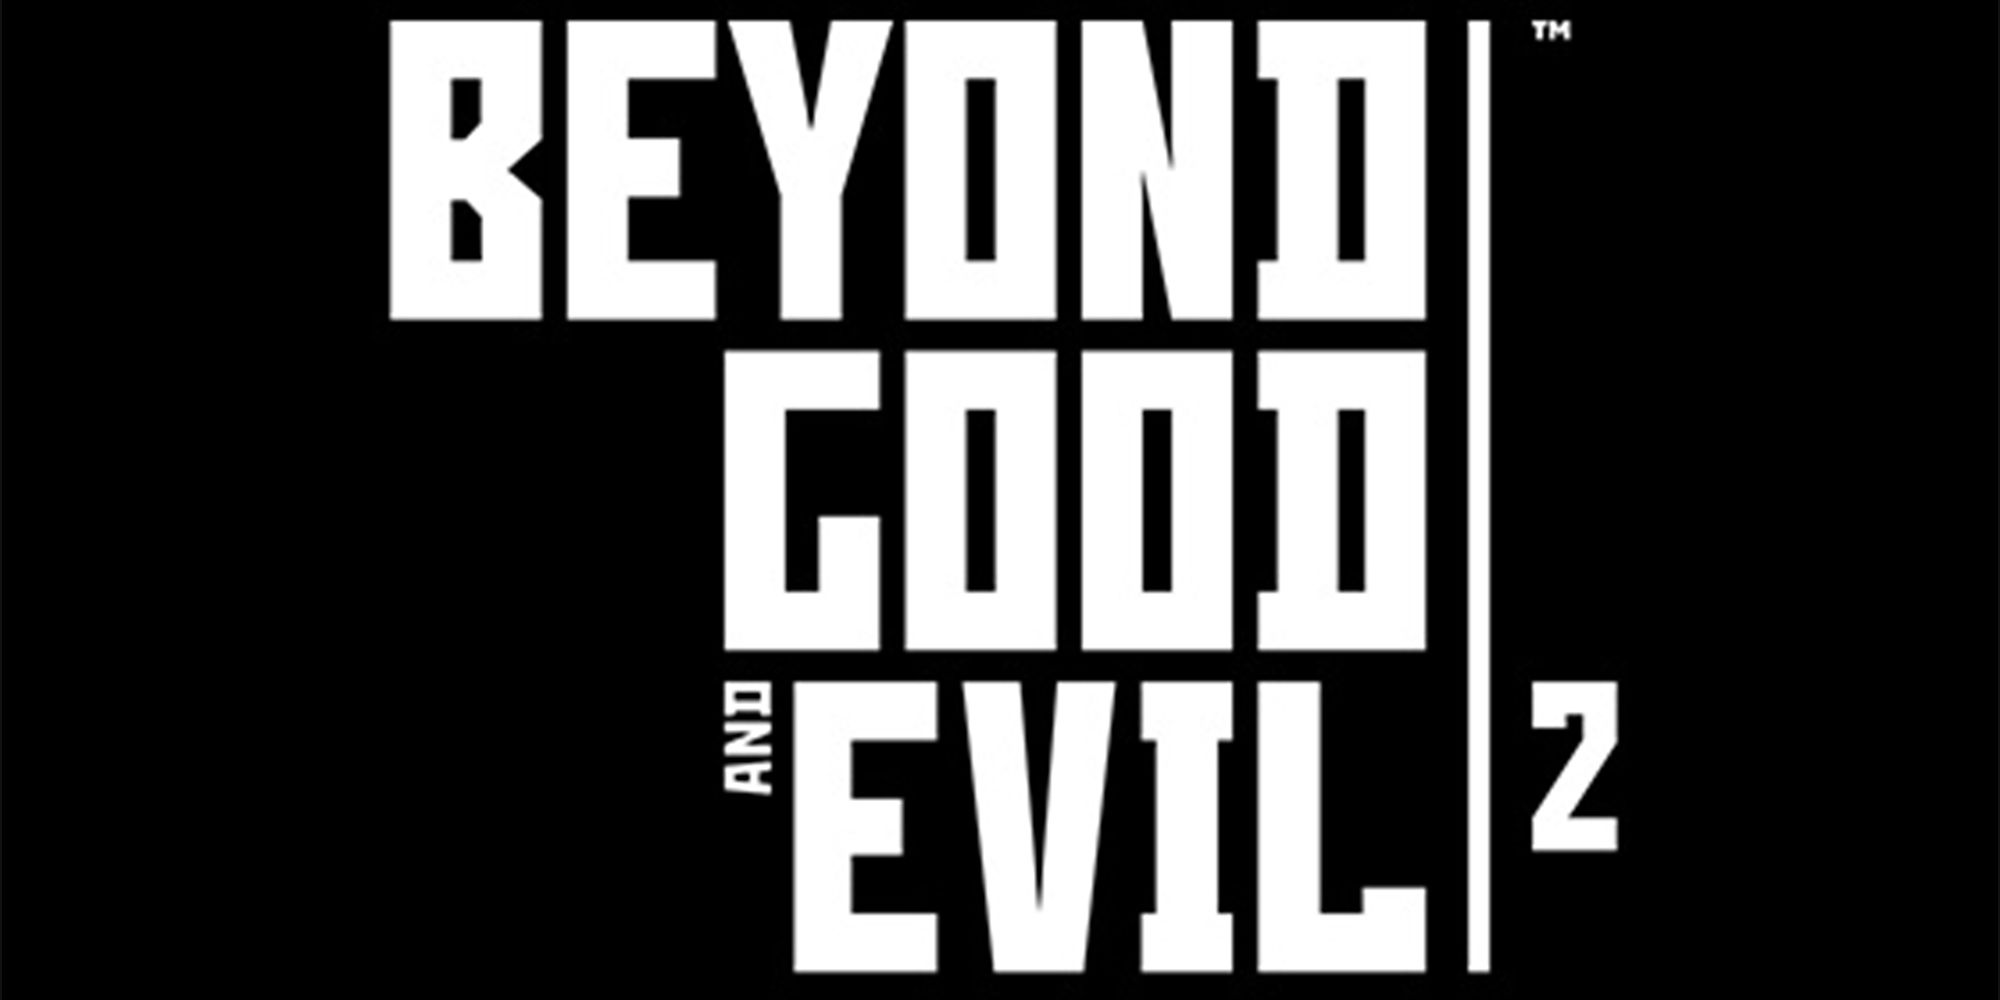 The logo of Beyond Good And Evil 2, currently the record holder for longest game in development.